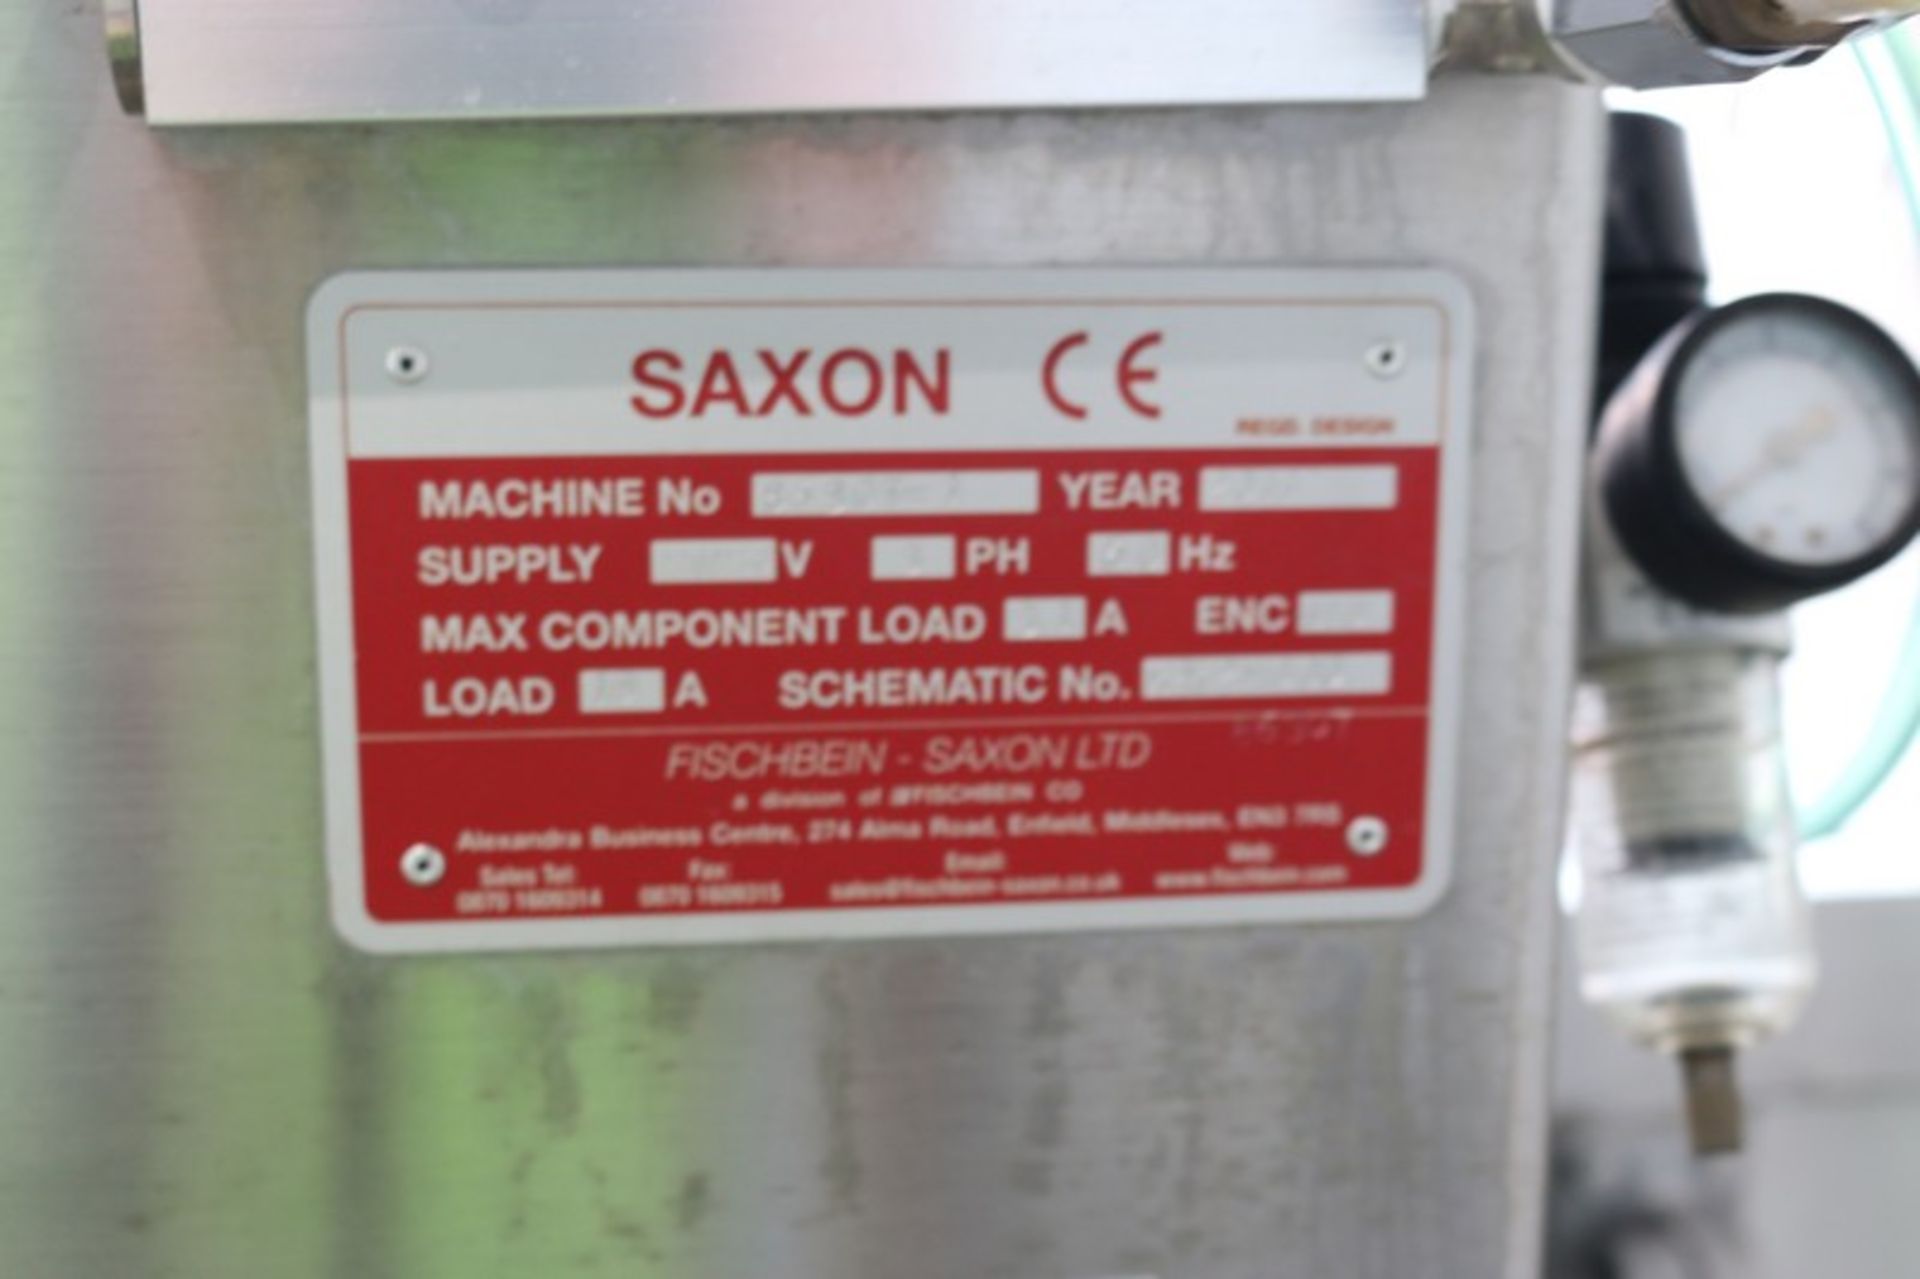 2011 Saxon Sealer,M/N 86307-1, 220/230 Volts, 3 Phase, with Aprox. 6" W Belt, Mounted S/S Frame ( - Image 6 of 9